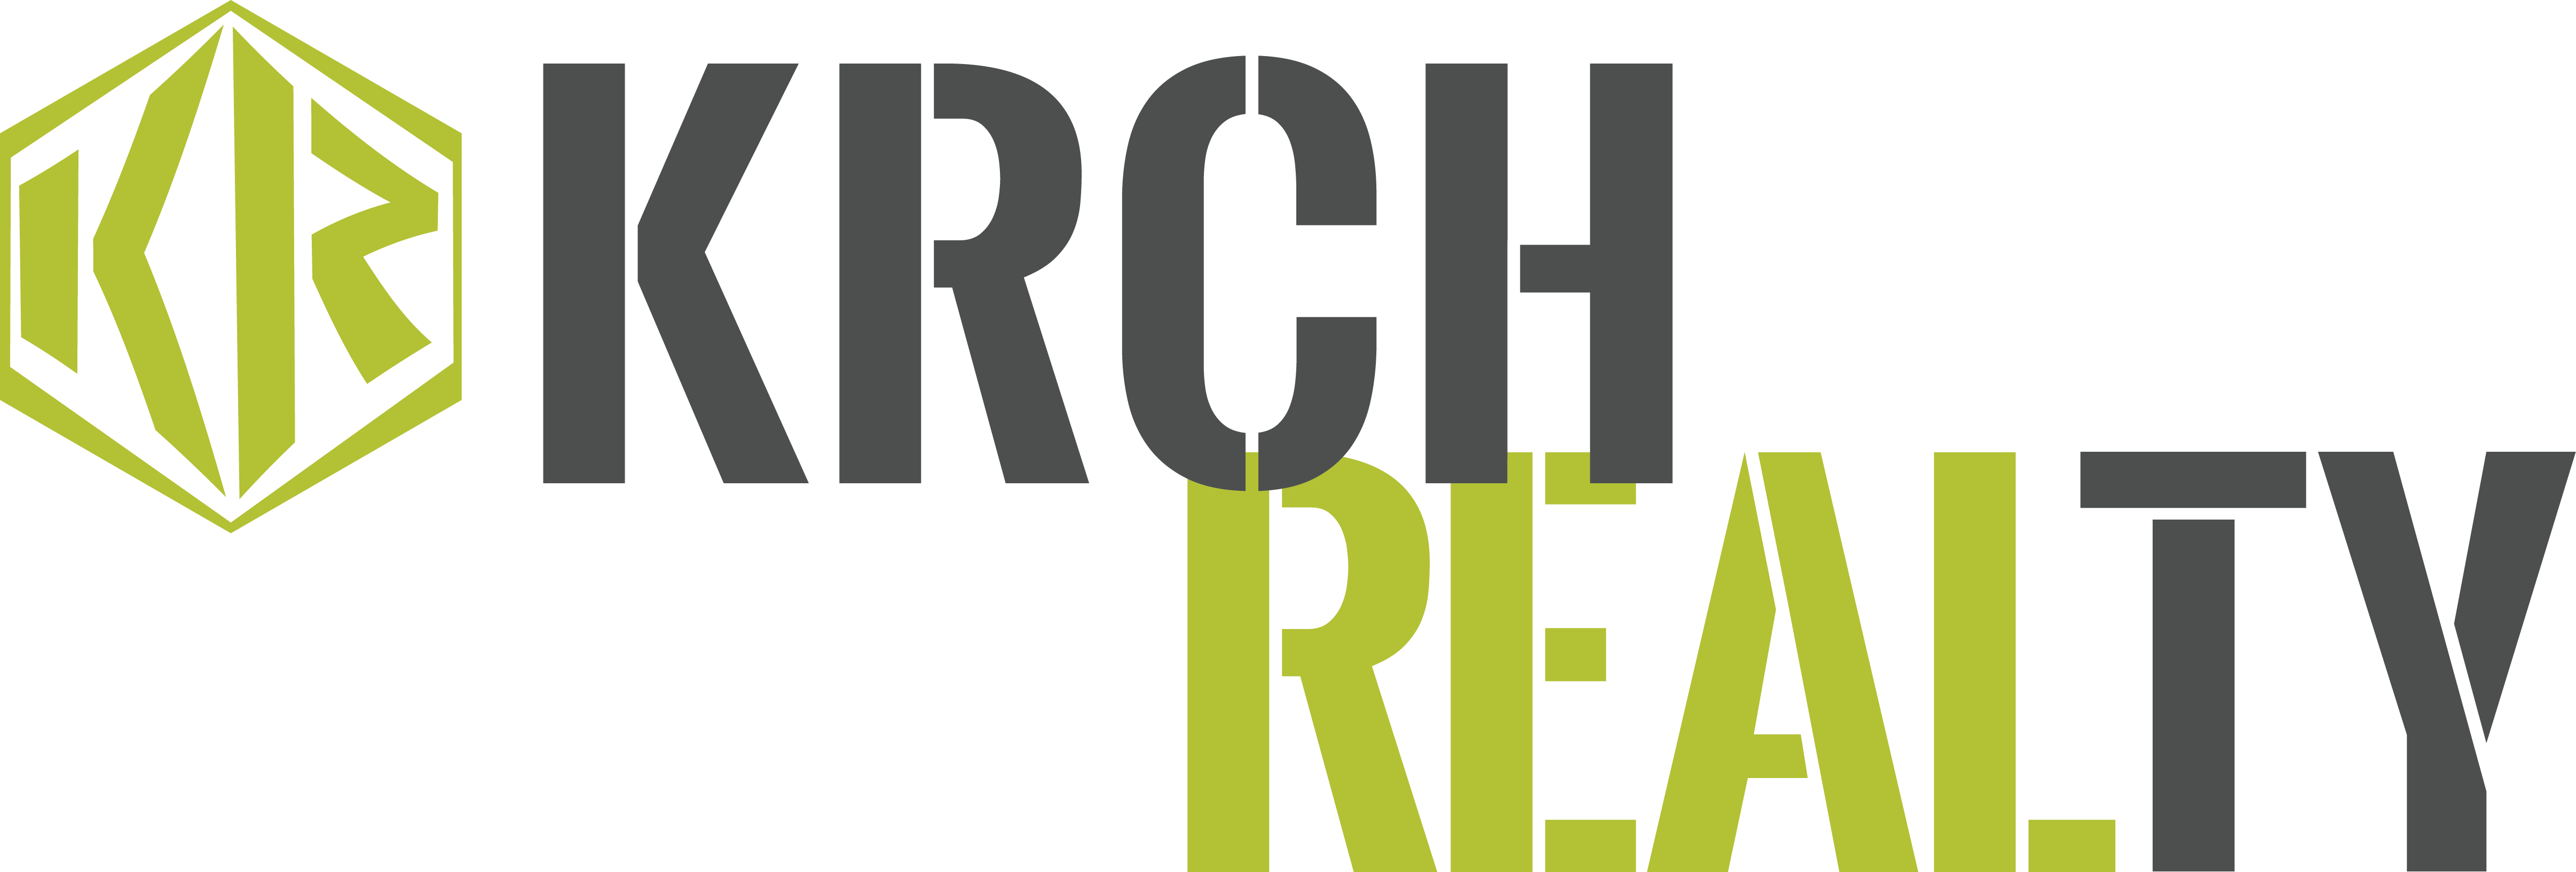 Krch Realty Hosting Holiday Toy Drive